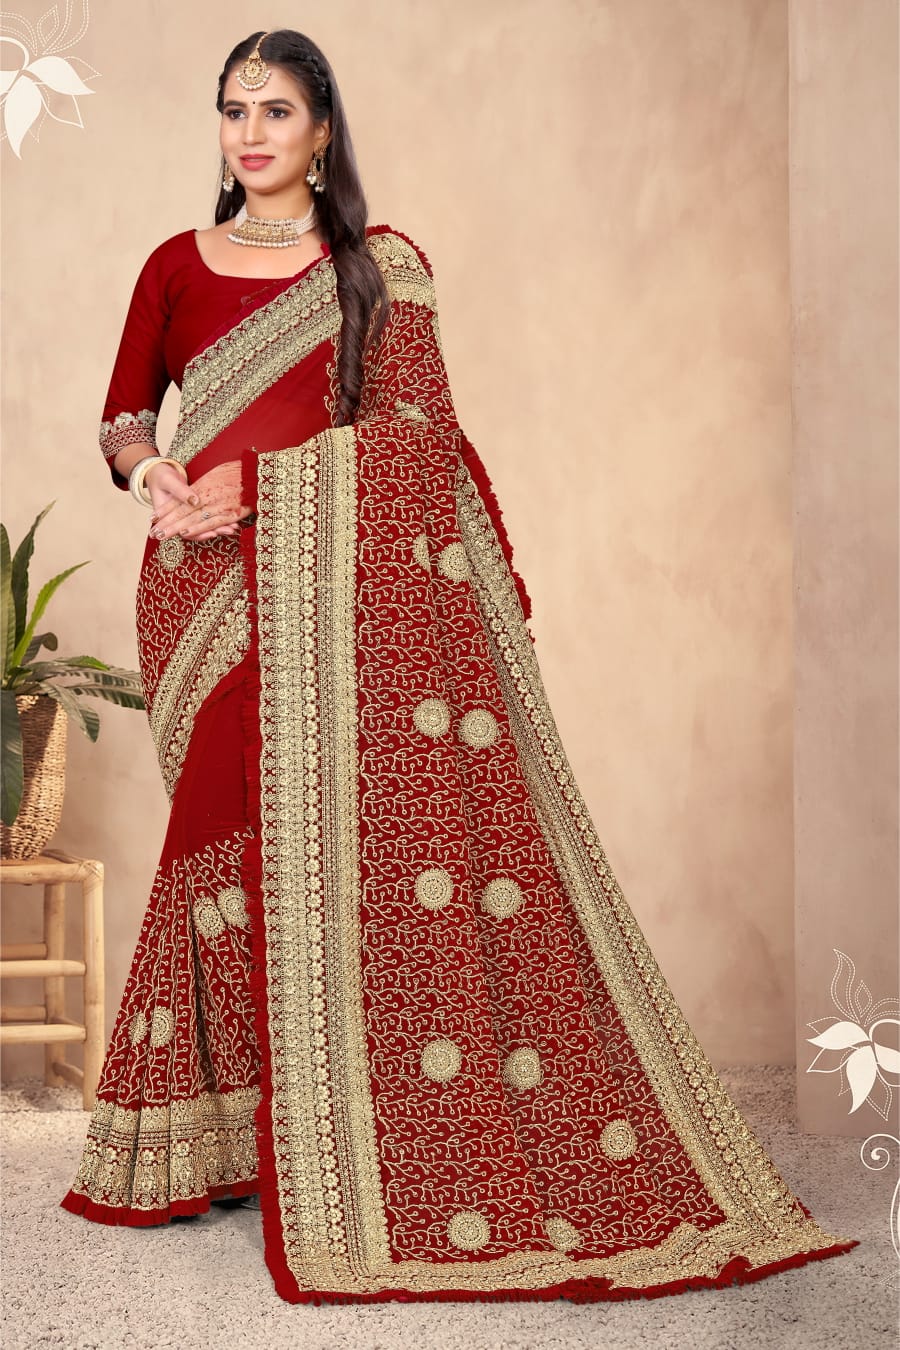 FULL JARI WORK ON PURE GEORGETTE SAREE IN RED FOR WEDDING 